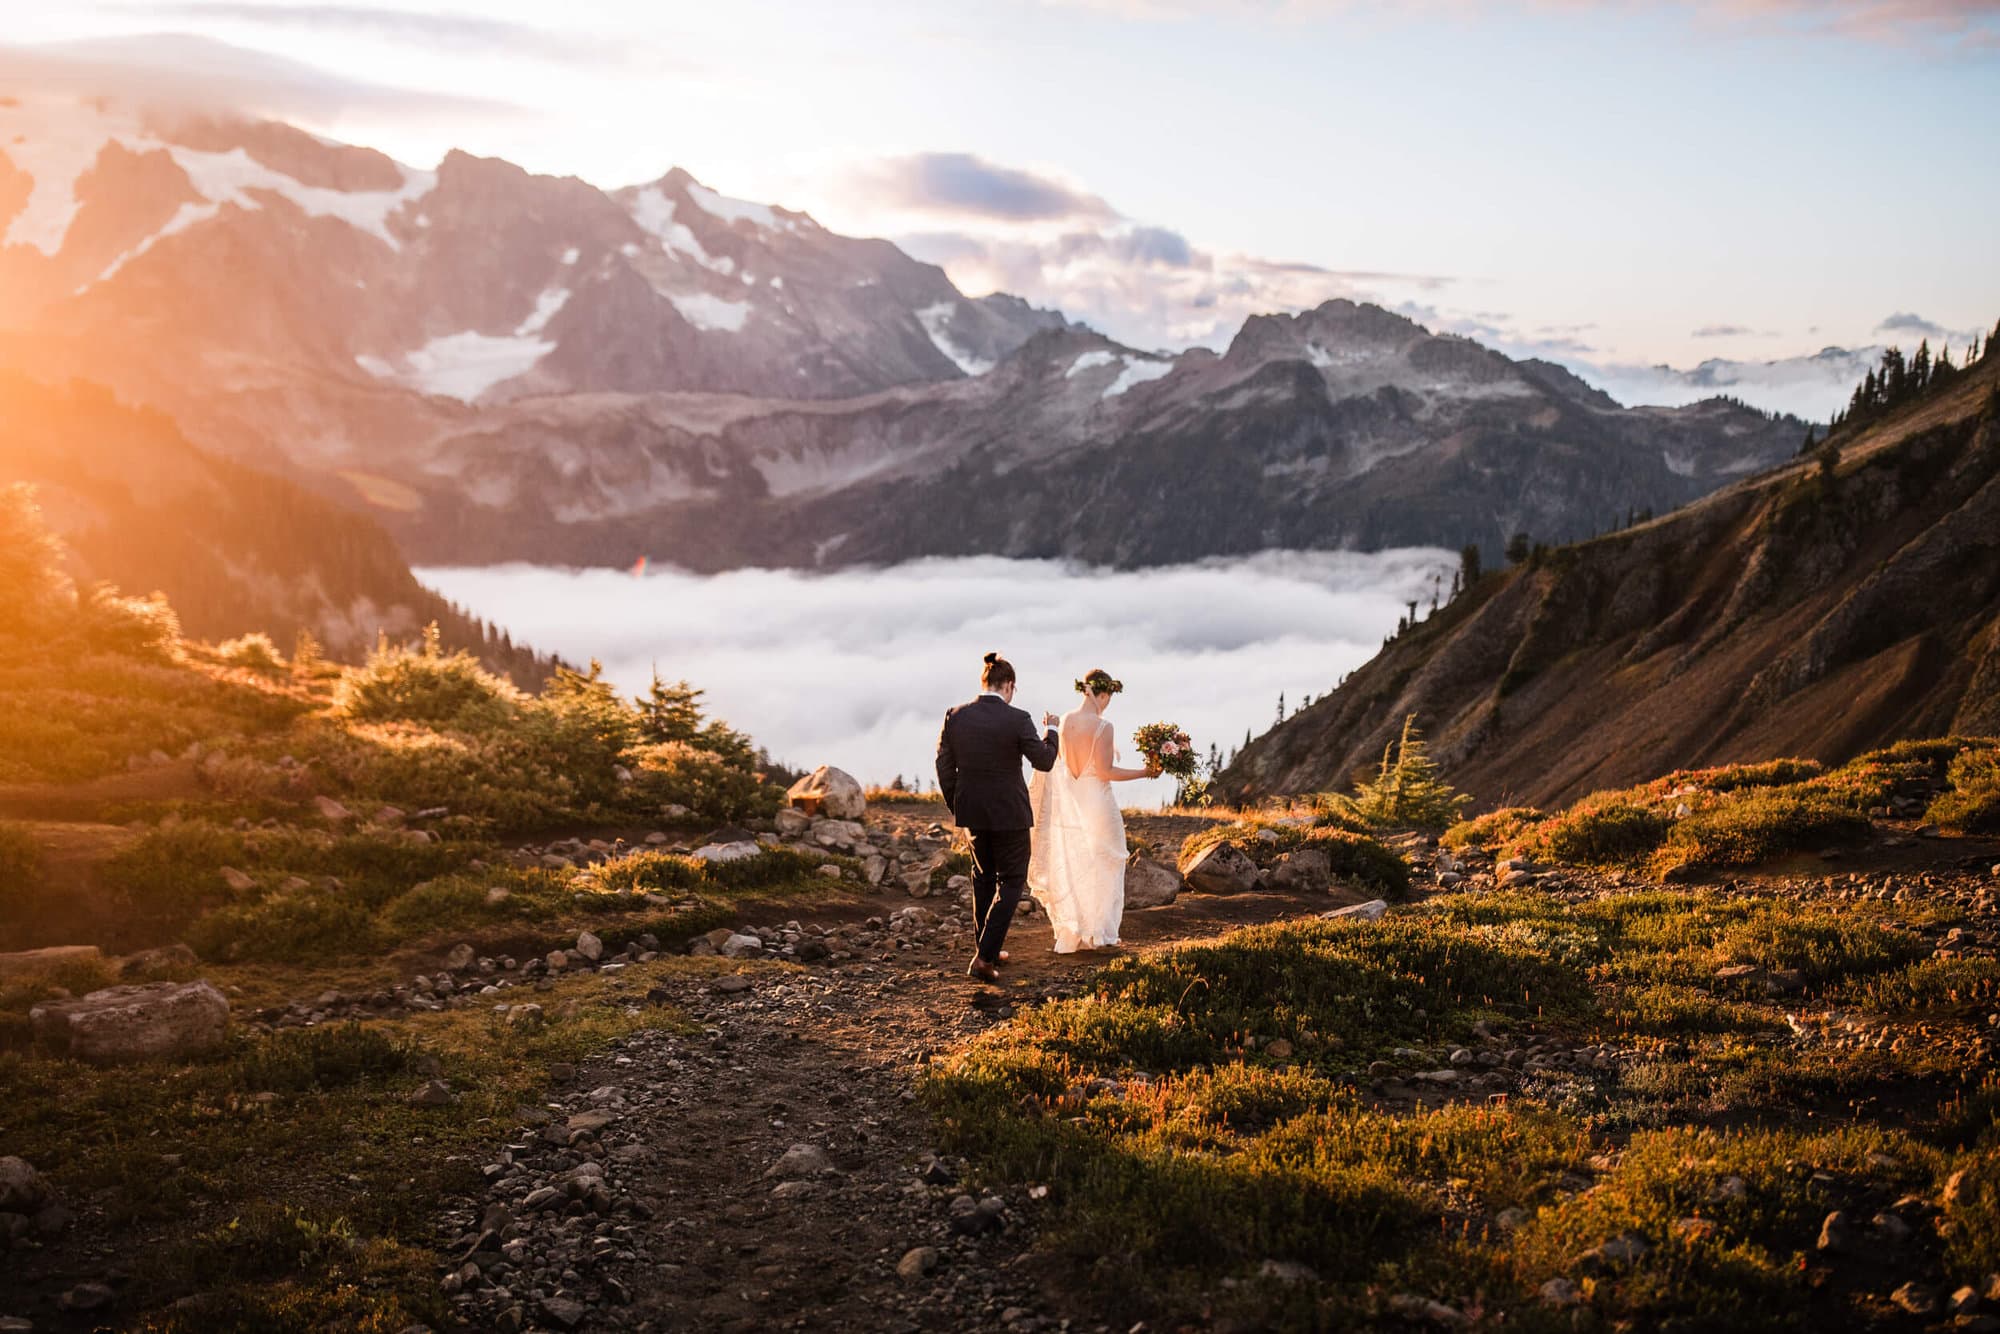 This Mount Baker elopement had the most trail magic ever. From sunrise cloud inversions to milky way night photos, you have to see this elopement. 